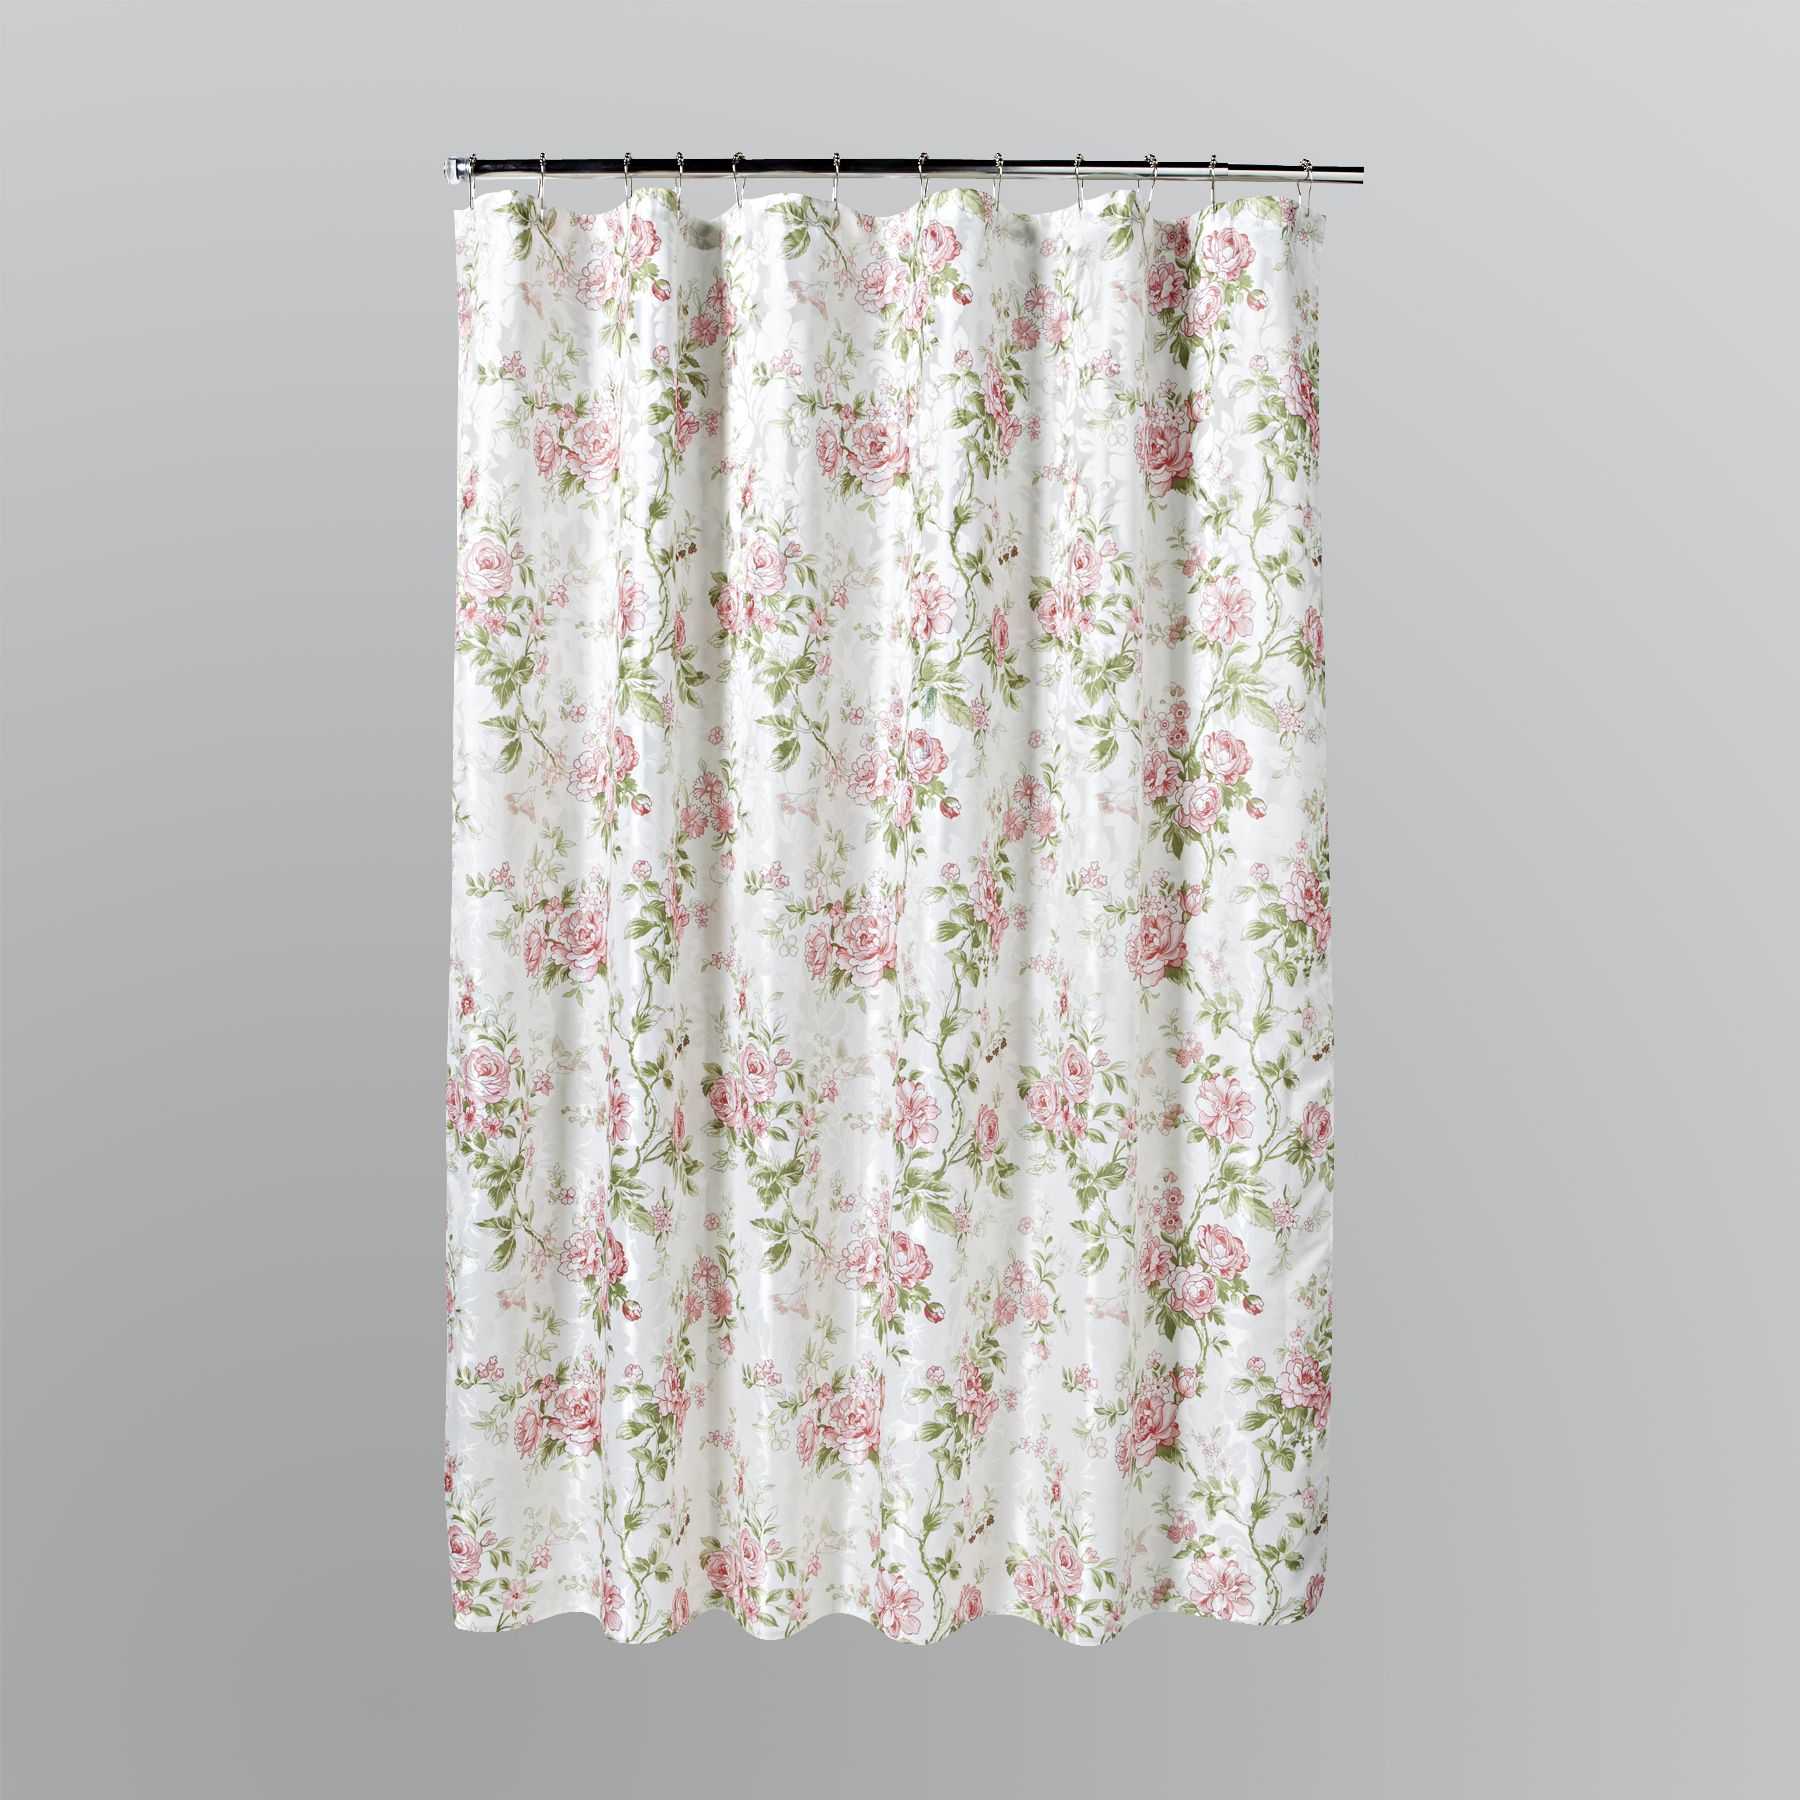 Home Solutions Emily Pink Floral Shower Curtain